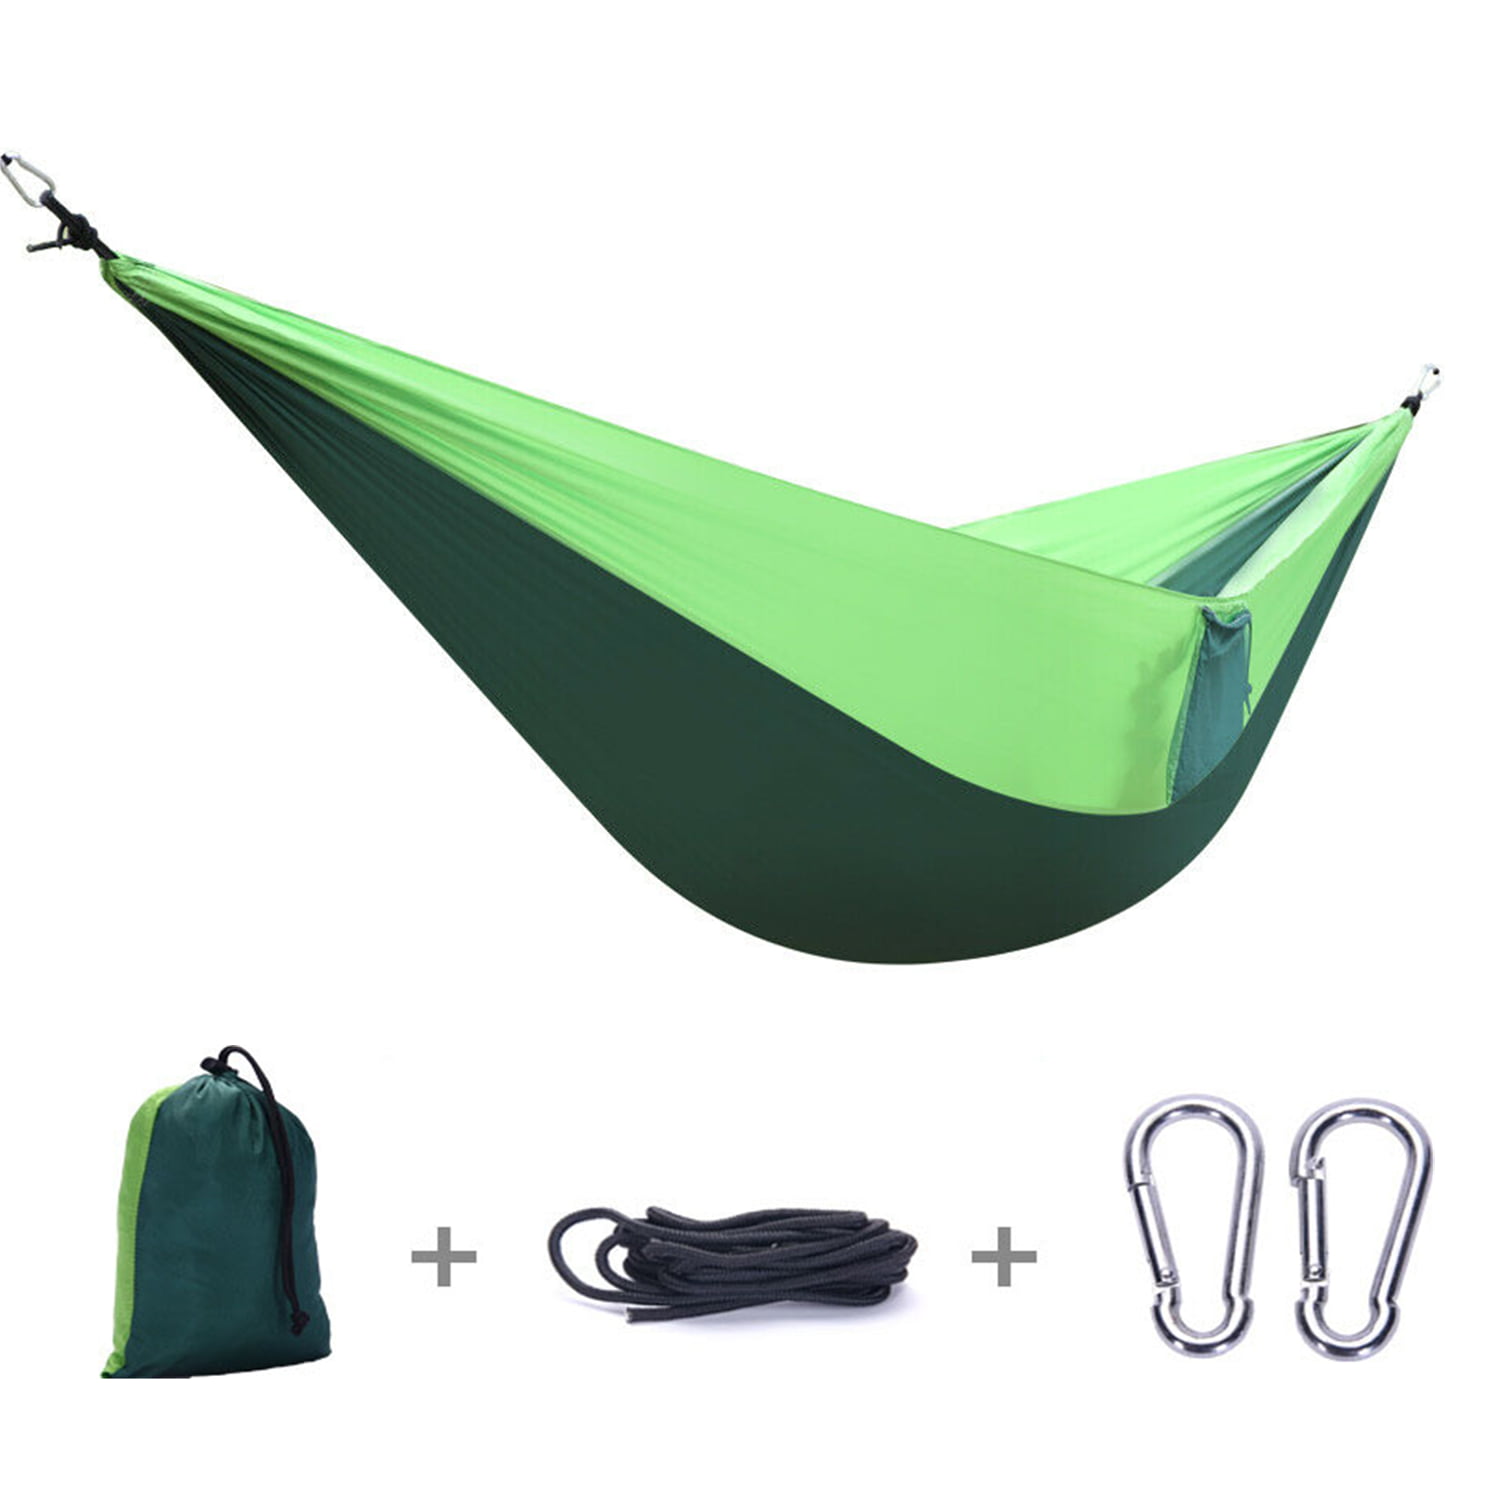 Beach Hiking Patio GOHIGH Camping Hammock Double & Single Portable Nylon Parachute Hammocks with Tree Straps Carabiners Gear for Indoor Outdoor Backpacking Travel Backyard 